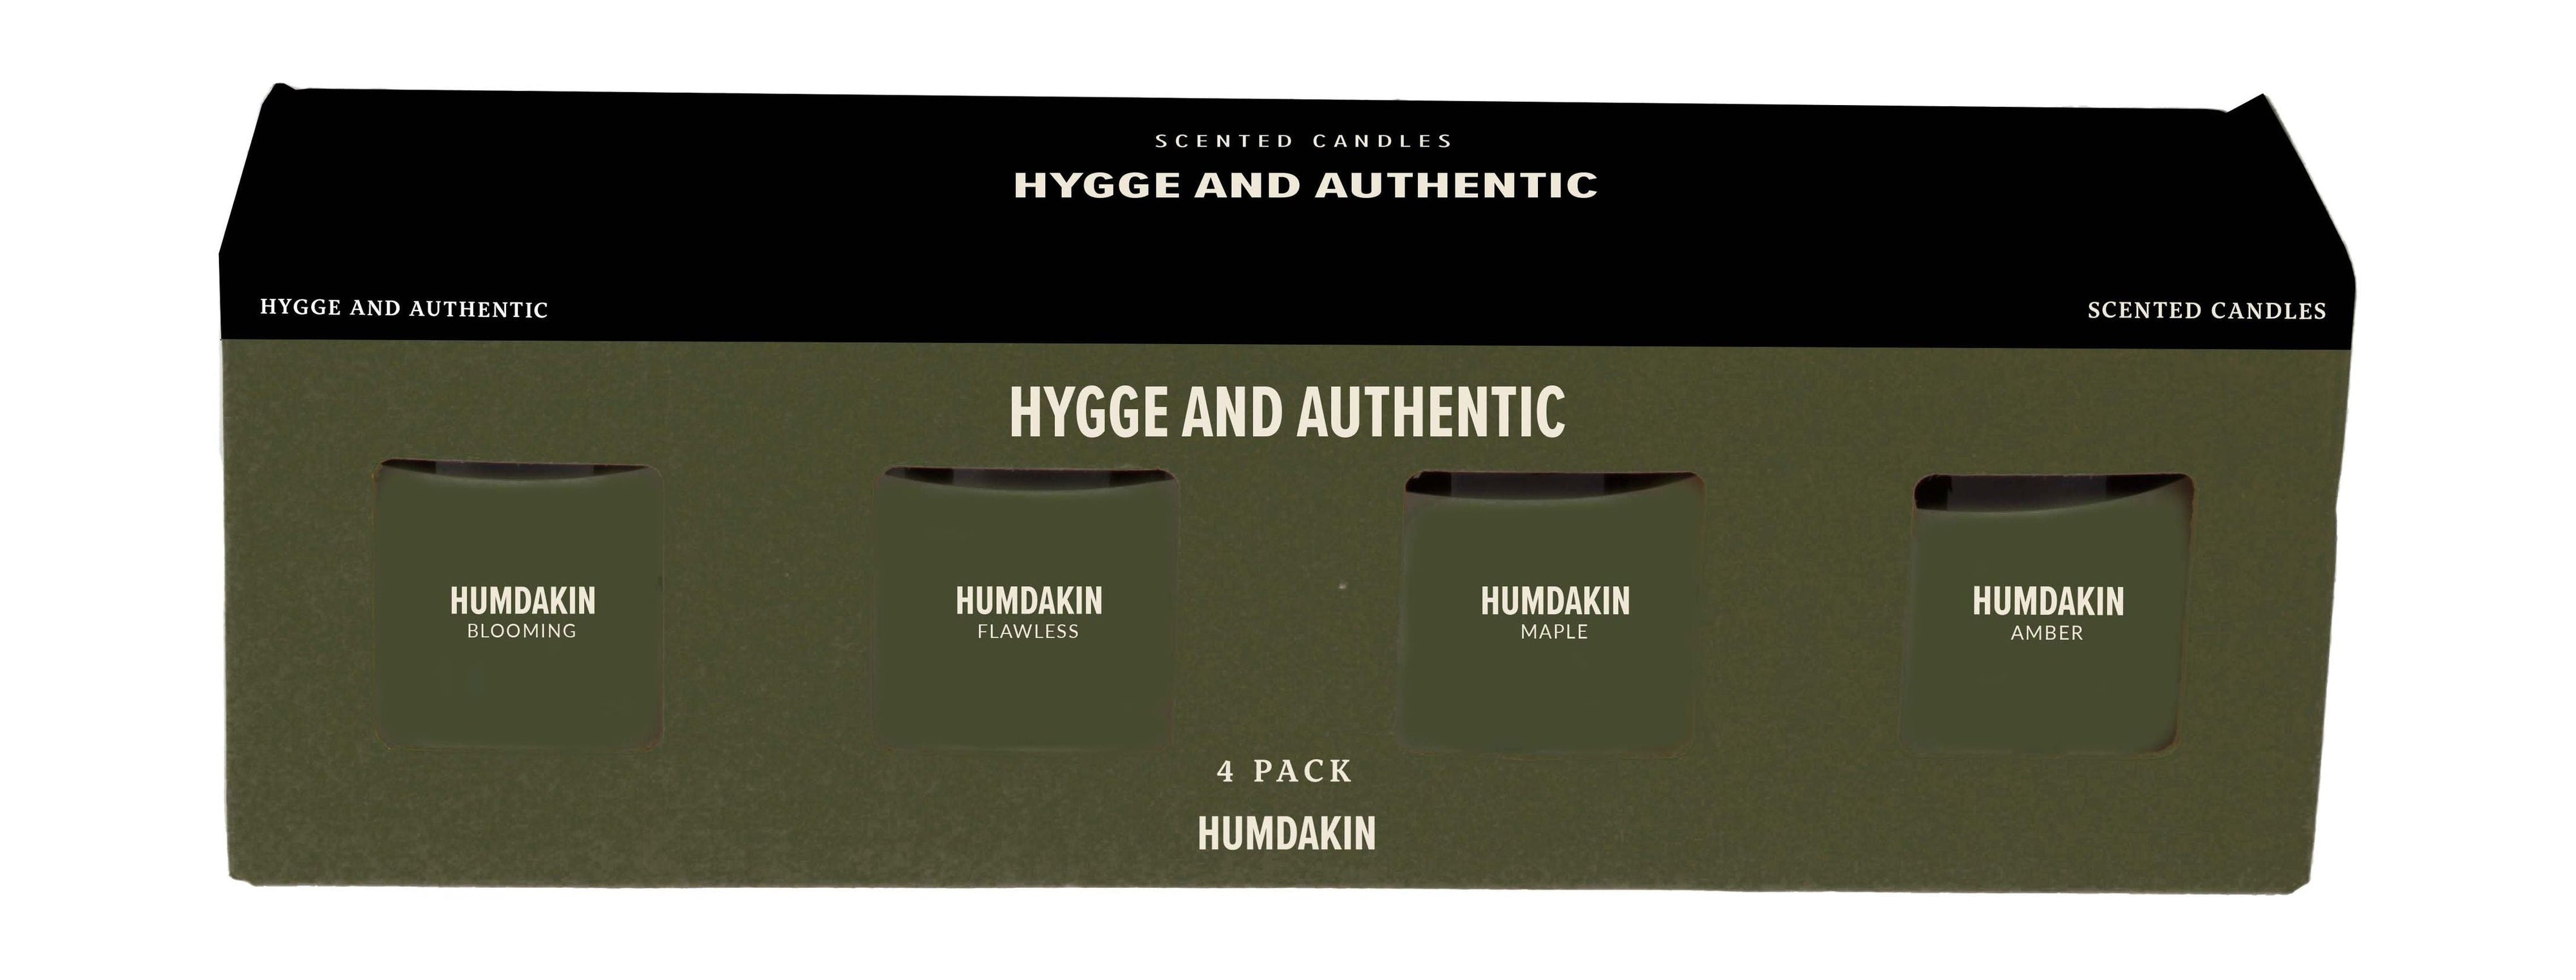 Humdakin Scented Candles Set Of 4, Hygge And Authentic